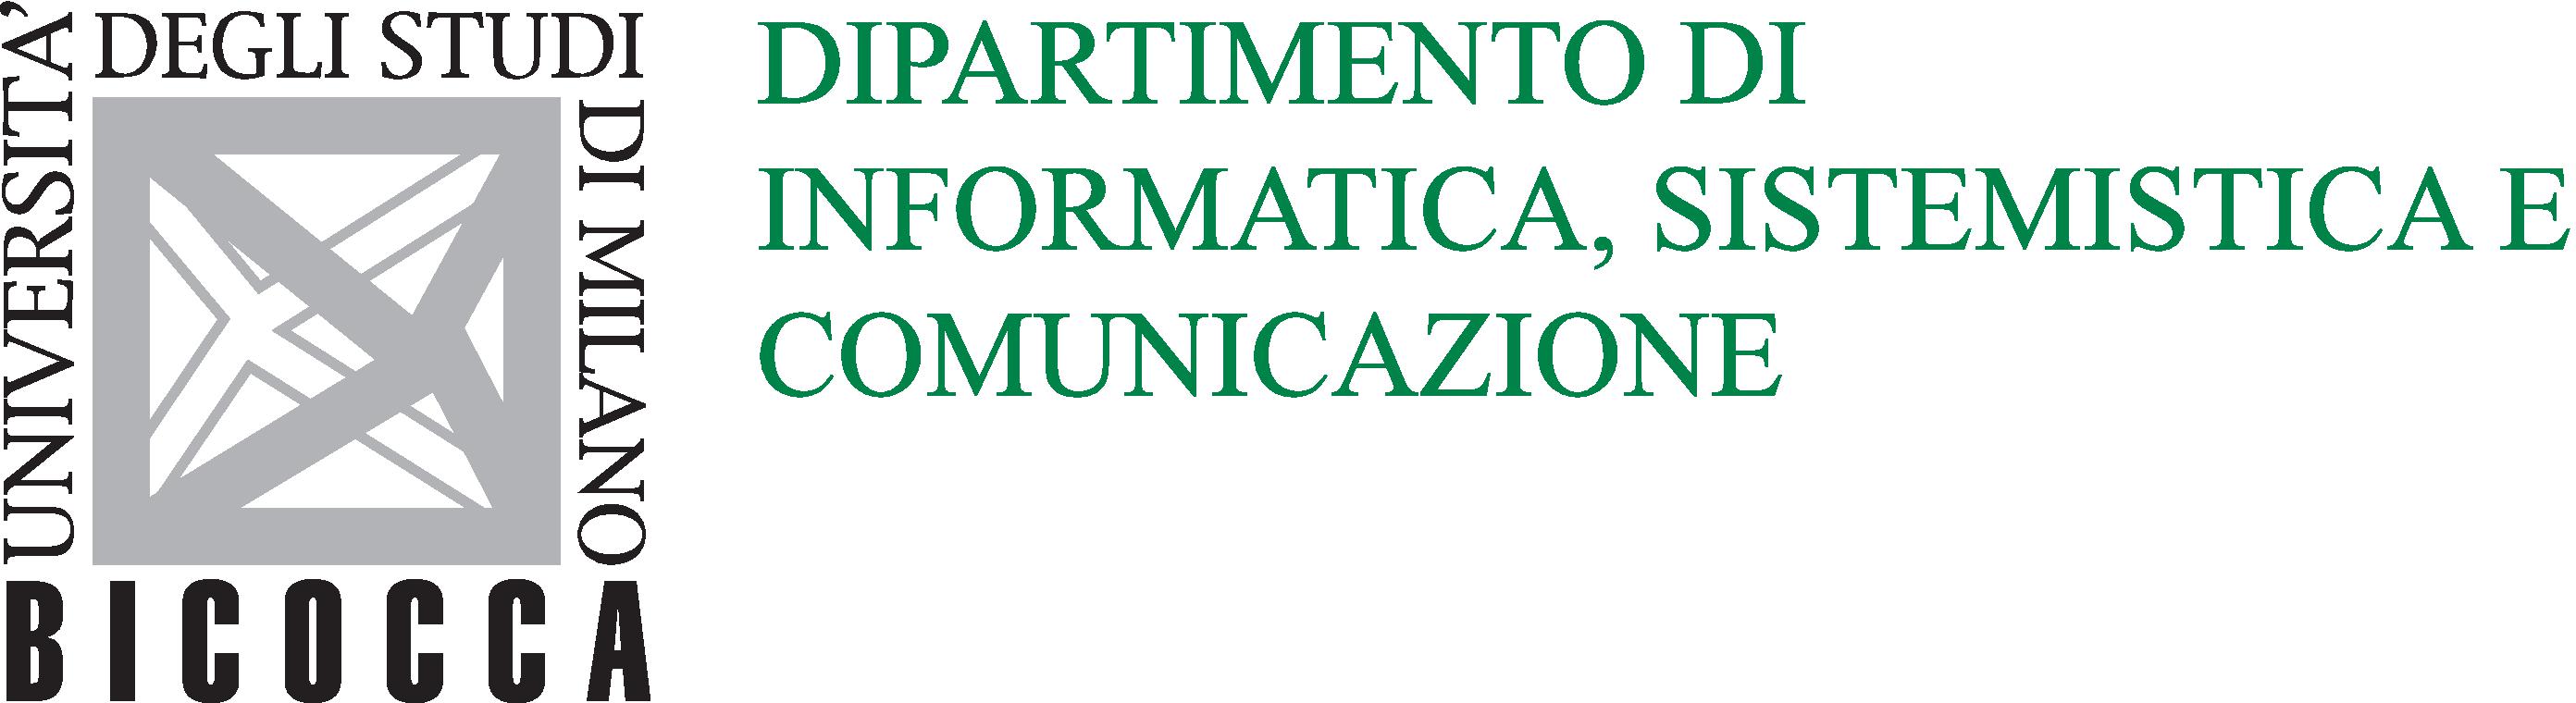 Department of Informatics, Systems and Communication, University of Milano-Bicocca, Italy